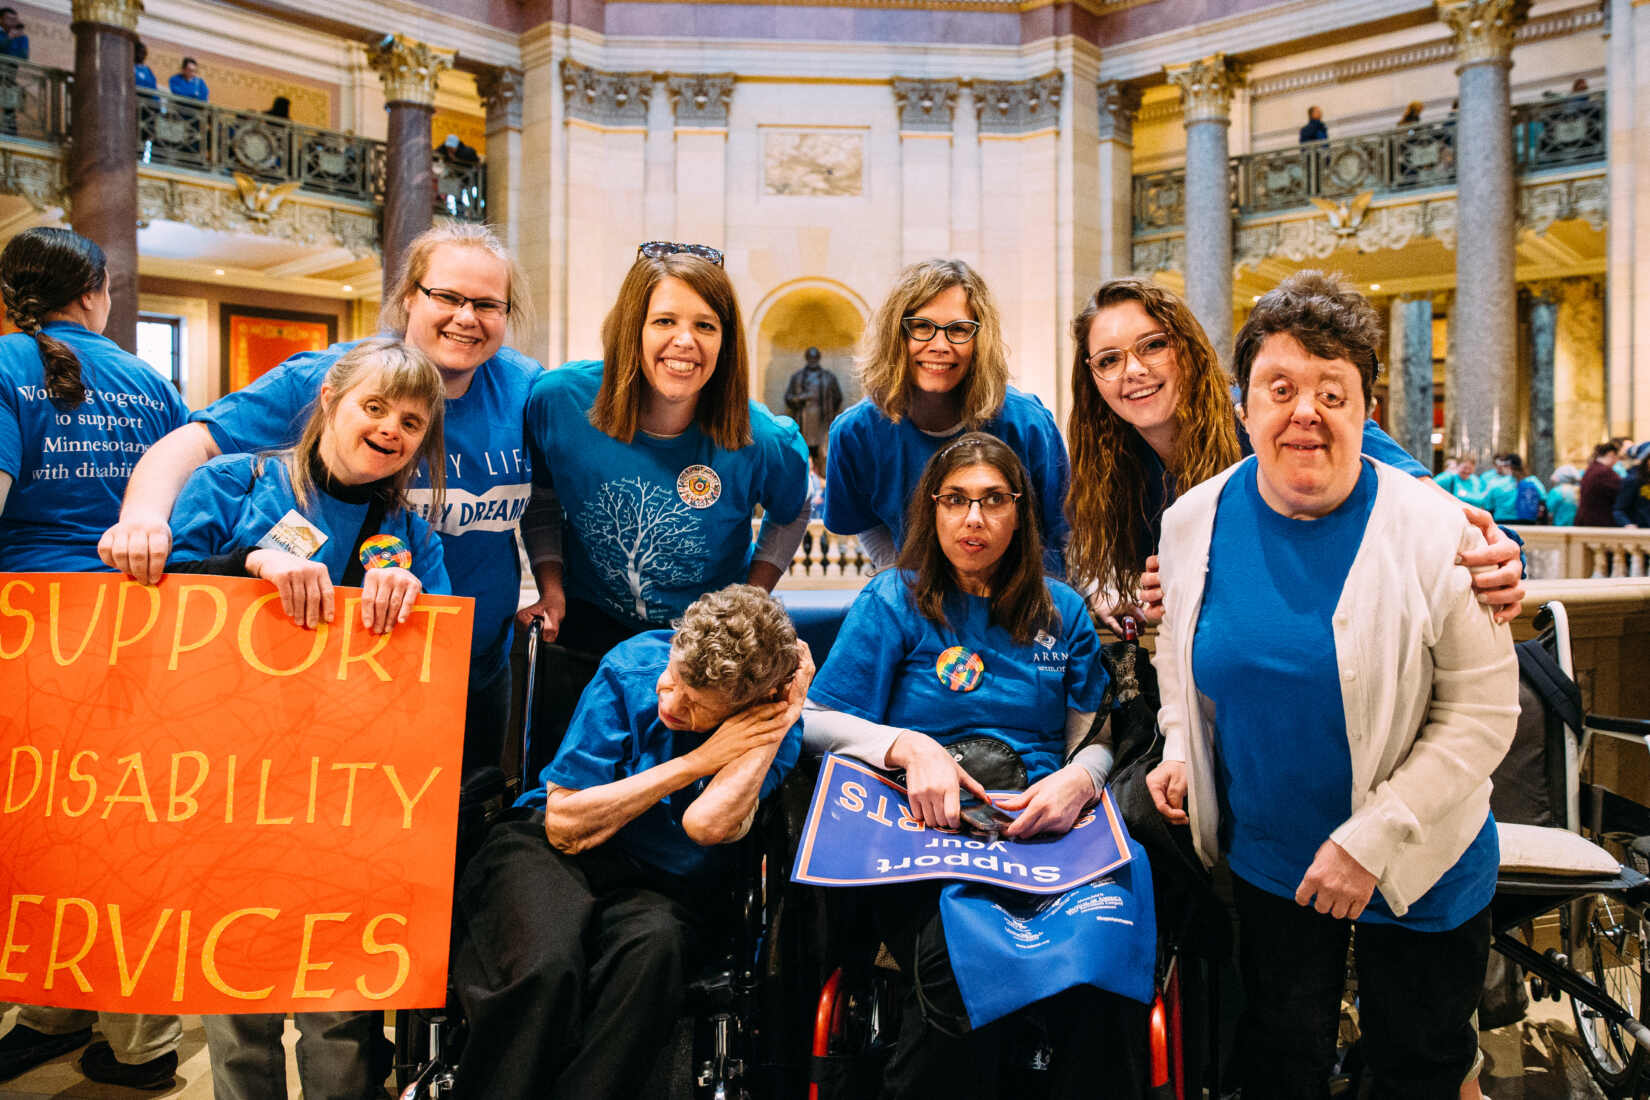 Residential Supervisor with Direct Care professionals and residents at Minnesota Rally advocating for people with disabilities